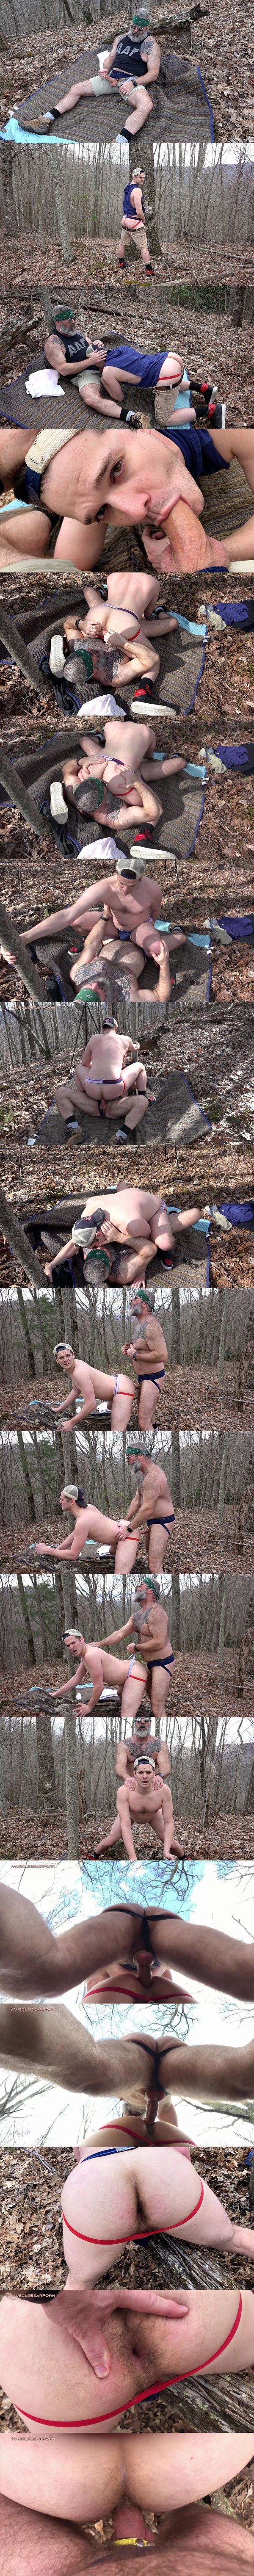 Fuzzy inked bear daddy Will Angell barebacks newcomer Scott Ryder in the woods before he creampies Scott in Scott's bottoming debut at Musclebearporn 01